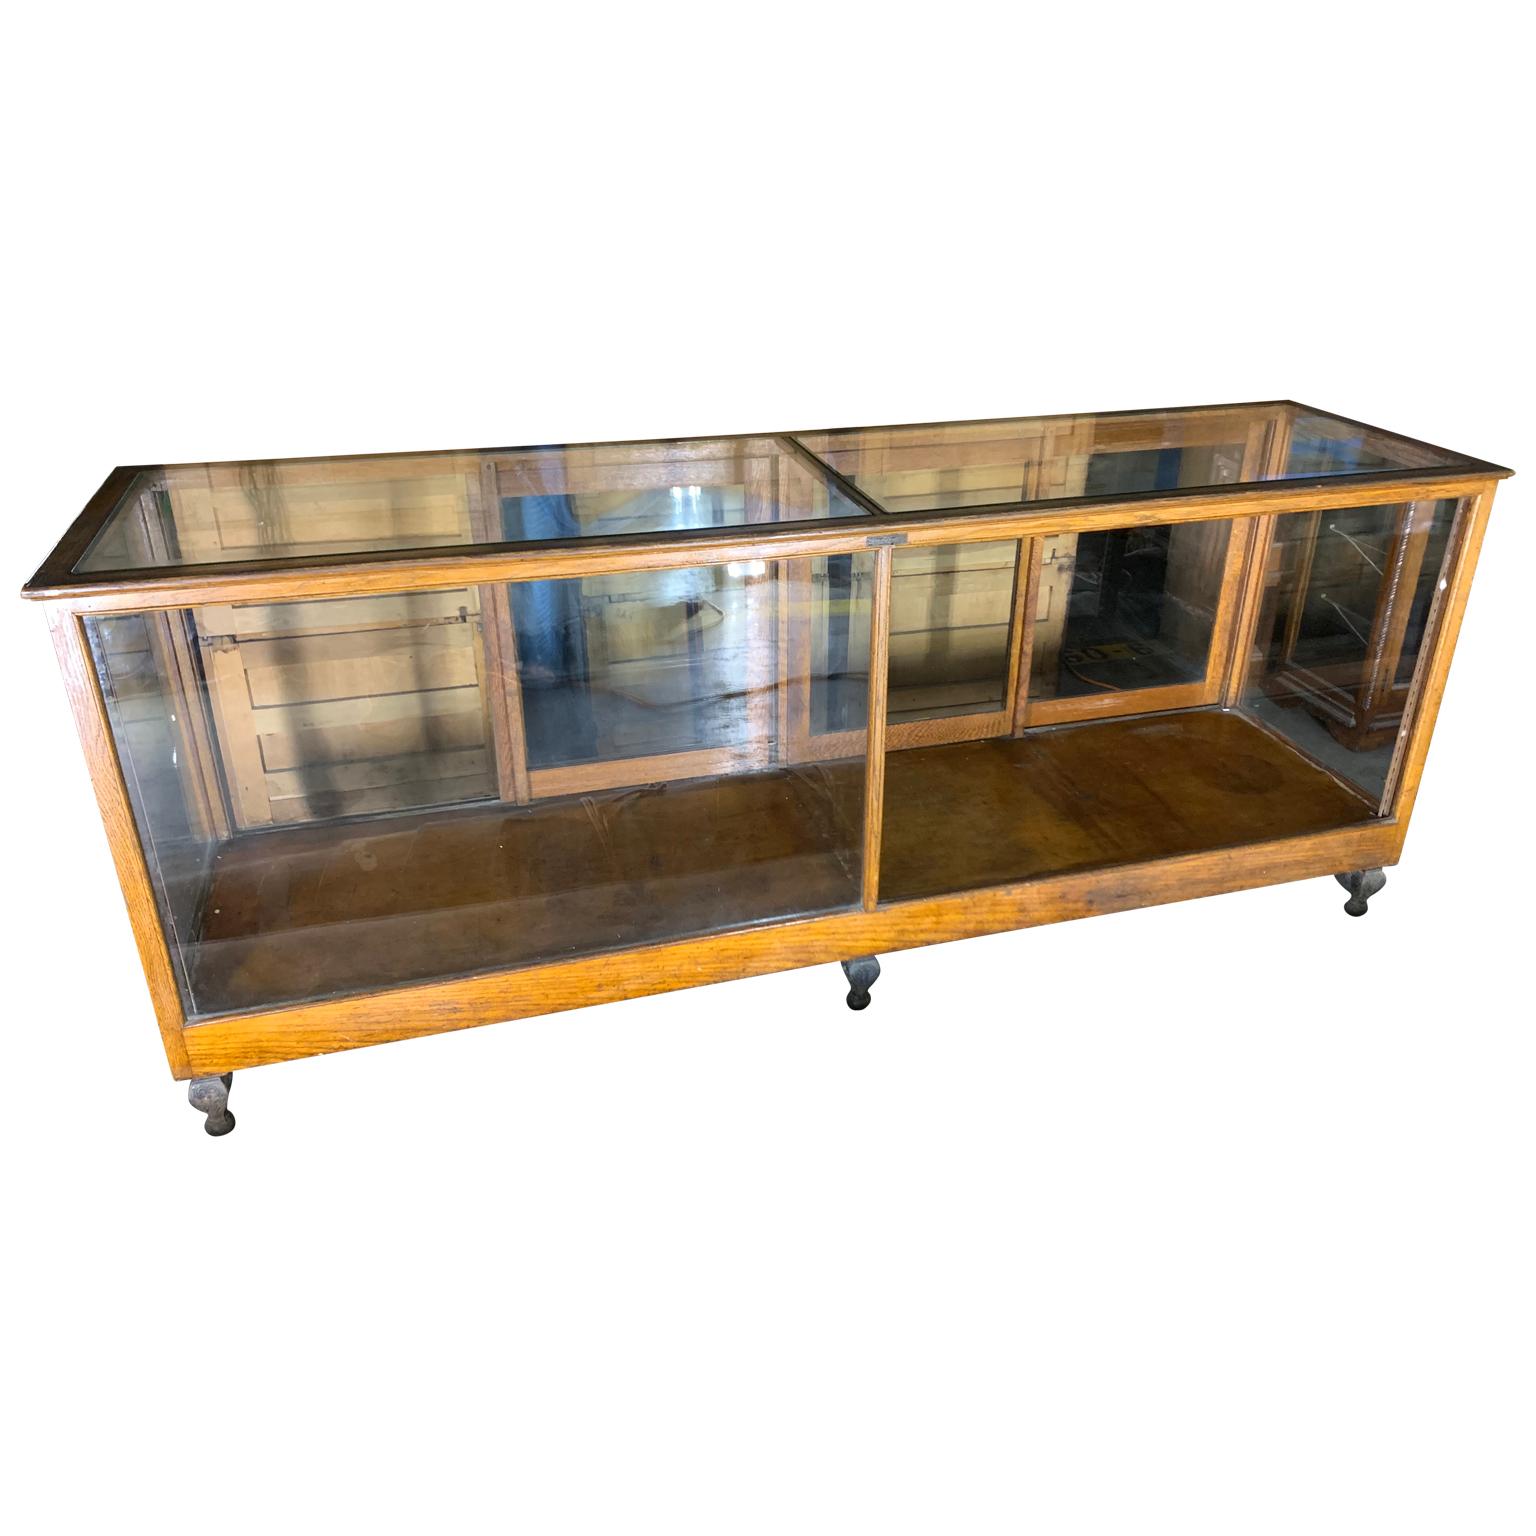 Early 20th century A N Russel & Sons wooden glass top display case vitrine.